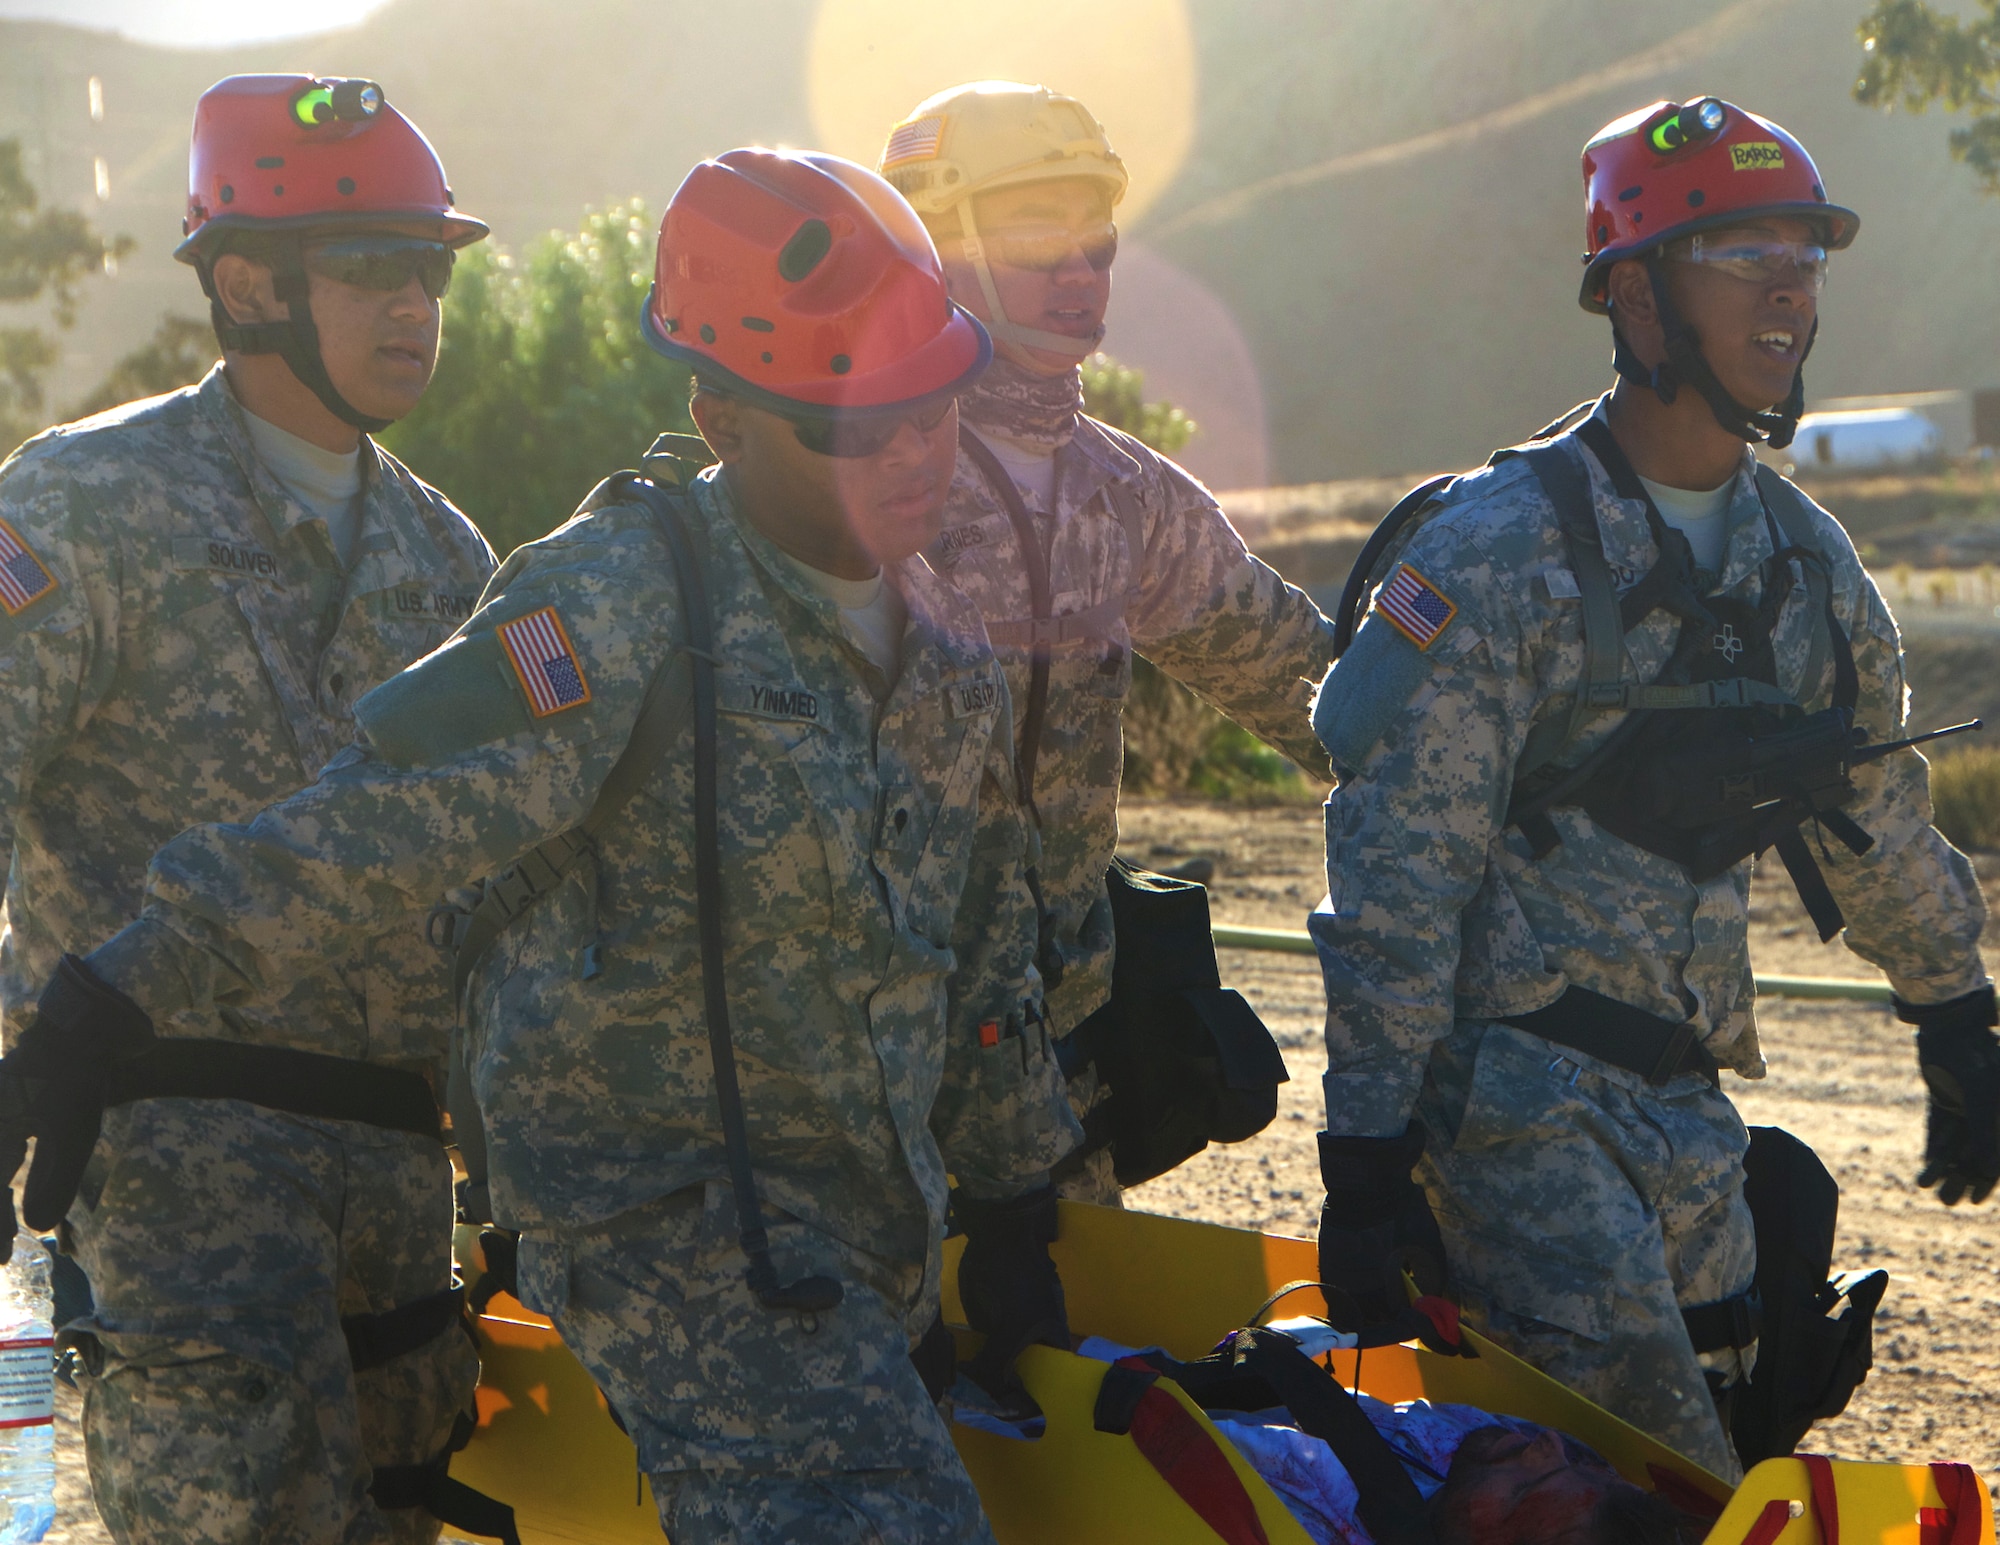 Hawaii Army National Guard soldiers evacuate a simulated victim during a medical evacuation scenario at Exercise Vigilant Guard 2017, Delle Valle Regional Center, California, Nov. 17, 2016. Vigilant Guard is an exercise program sponsored by United States Northern Command in conjunction with National Guard Bureau to provide State National Guards an opportunity to improve cooperation and relationships with their regional civilian, military, and federal partners in preparation for emergencies and catastrophic events. (U.S. Air National Guard photo by Senior Airman Orlando Corpuz) 